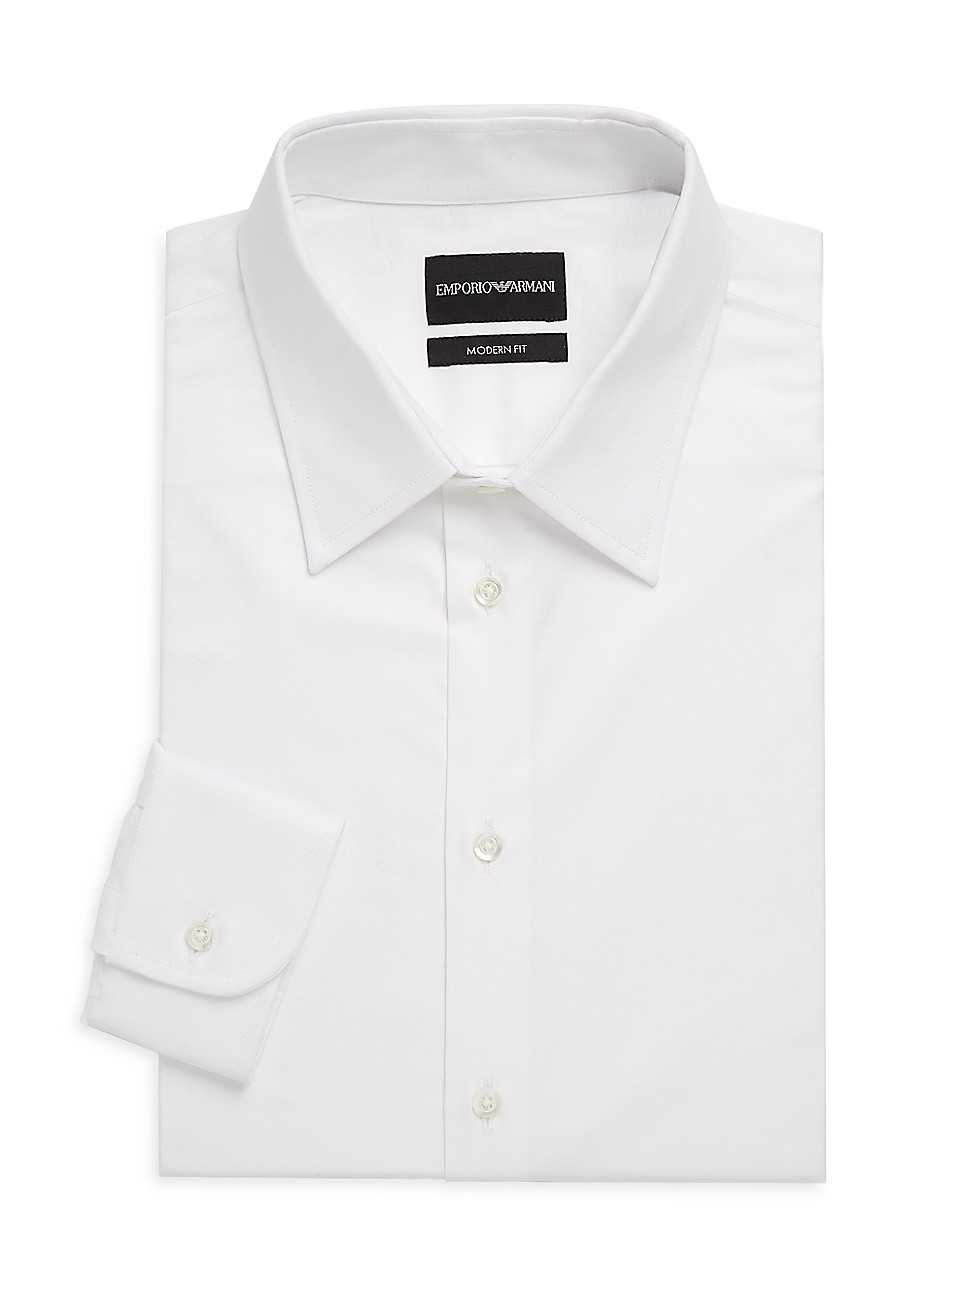 8 Best Dress Shirts for Men: Stylish Options for Any Occasion | TIME ...